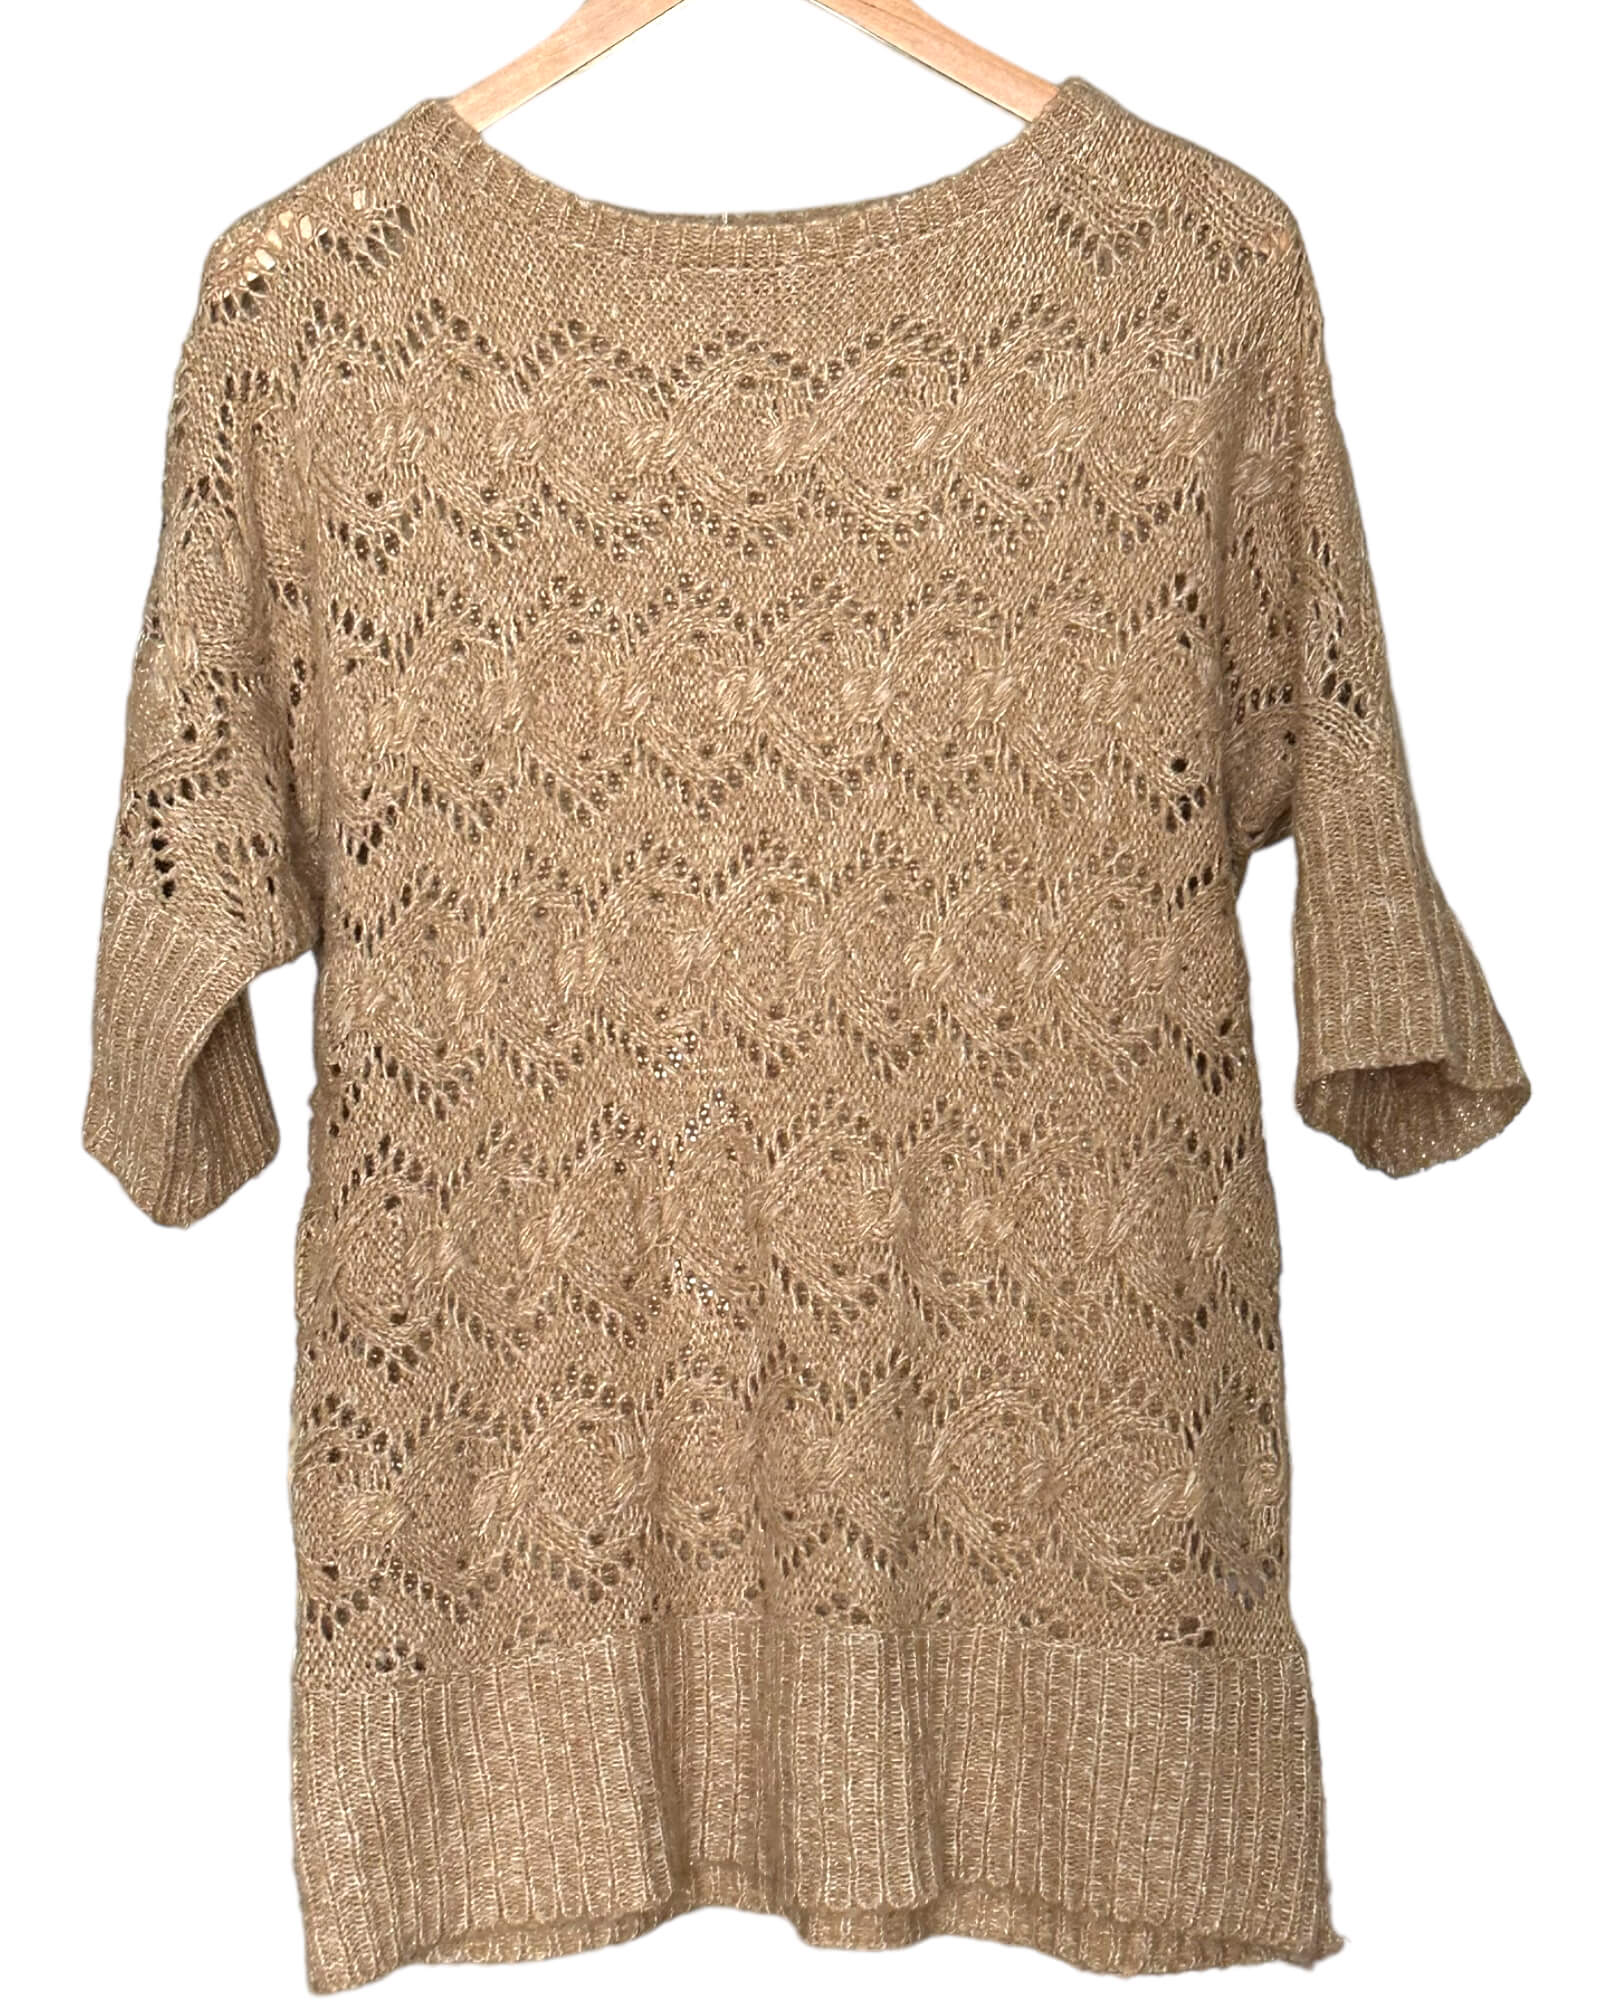 Light Spring Camel & Gold Open Cable-Knit Sweater